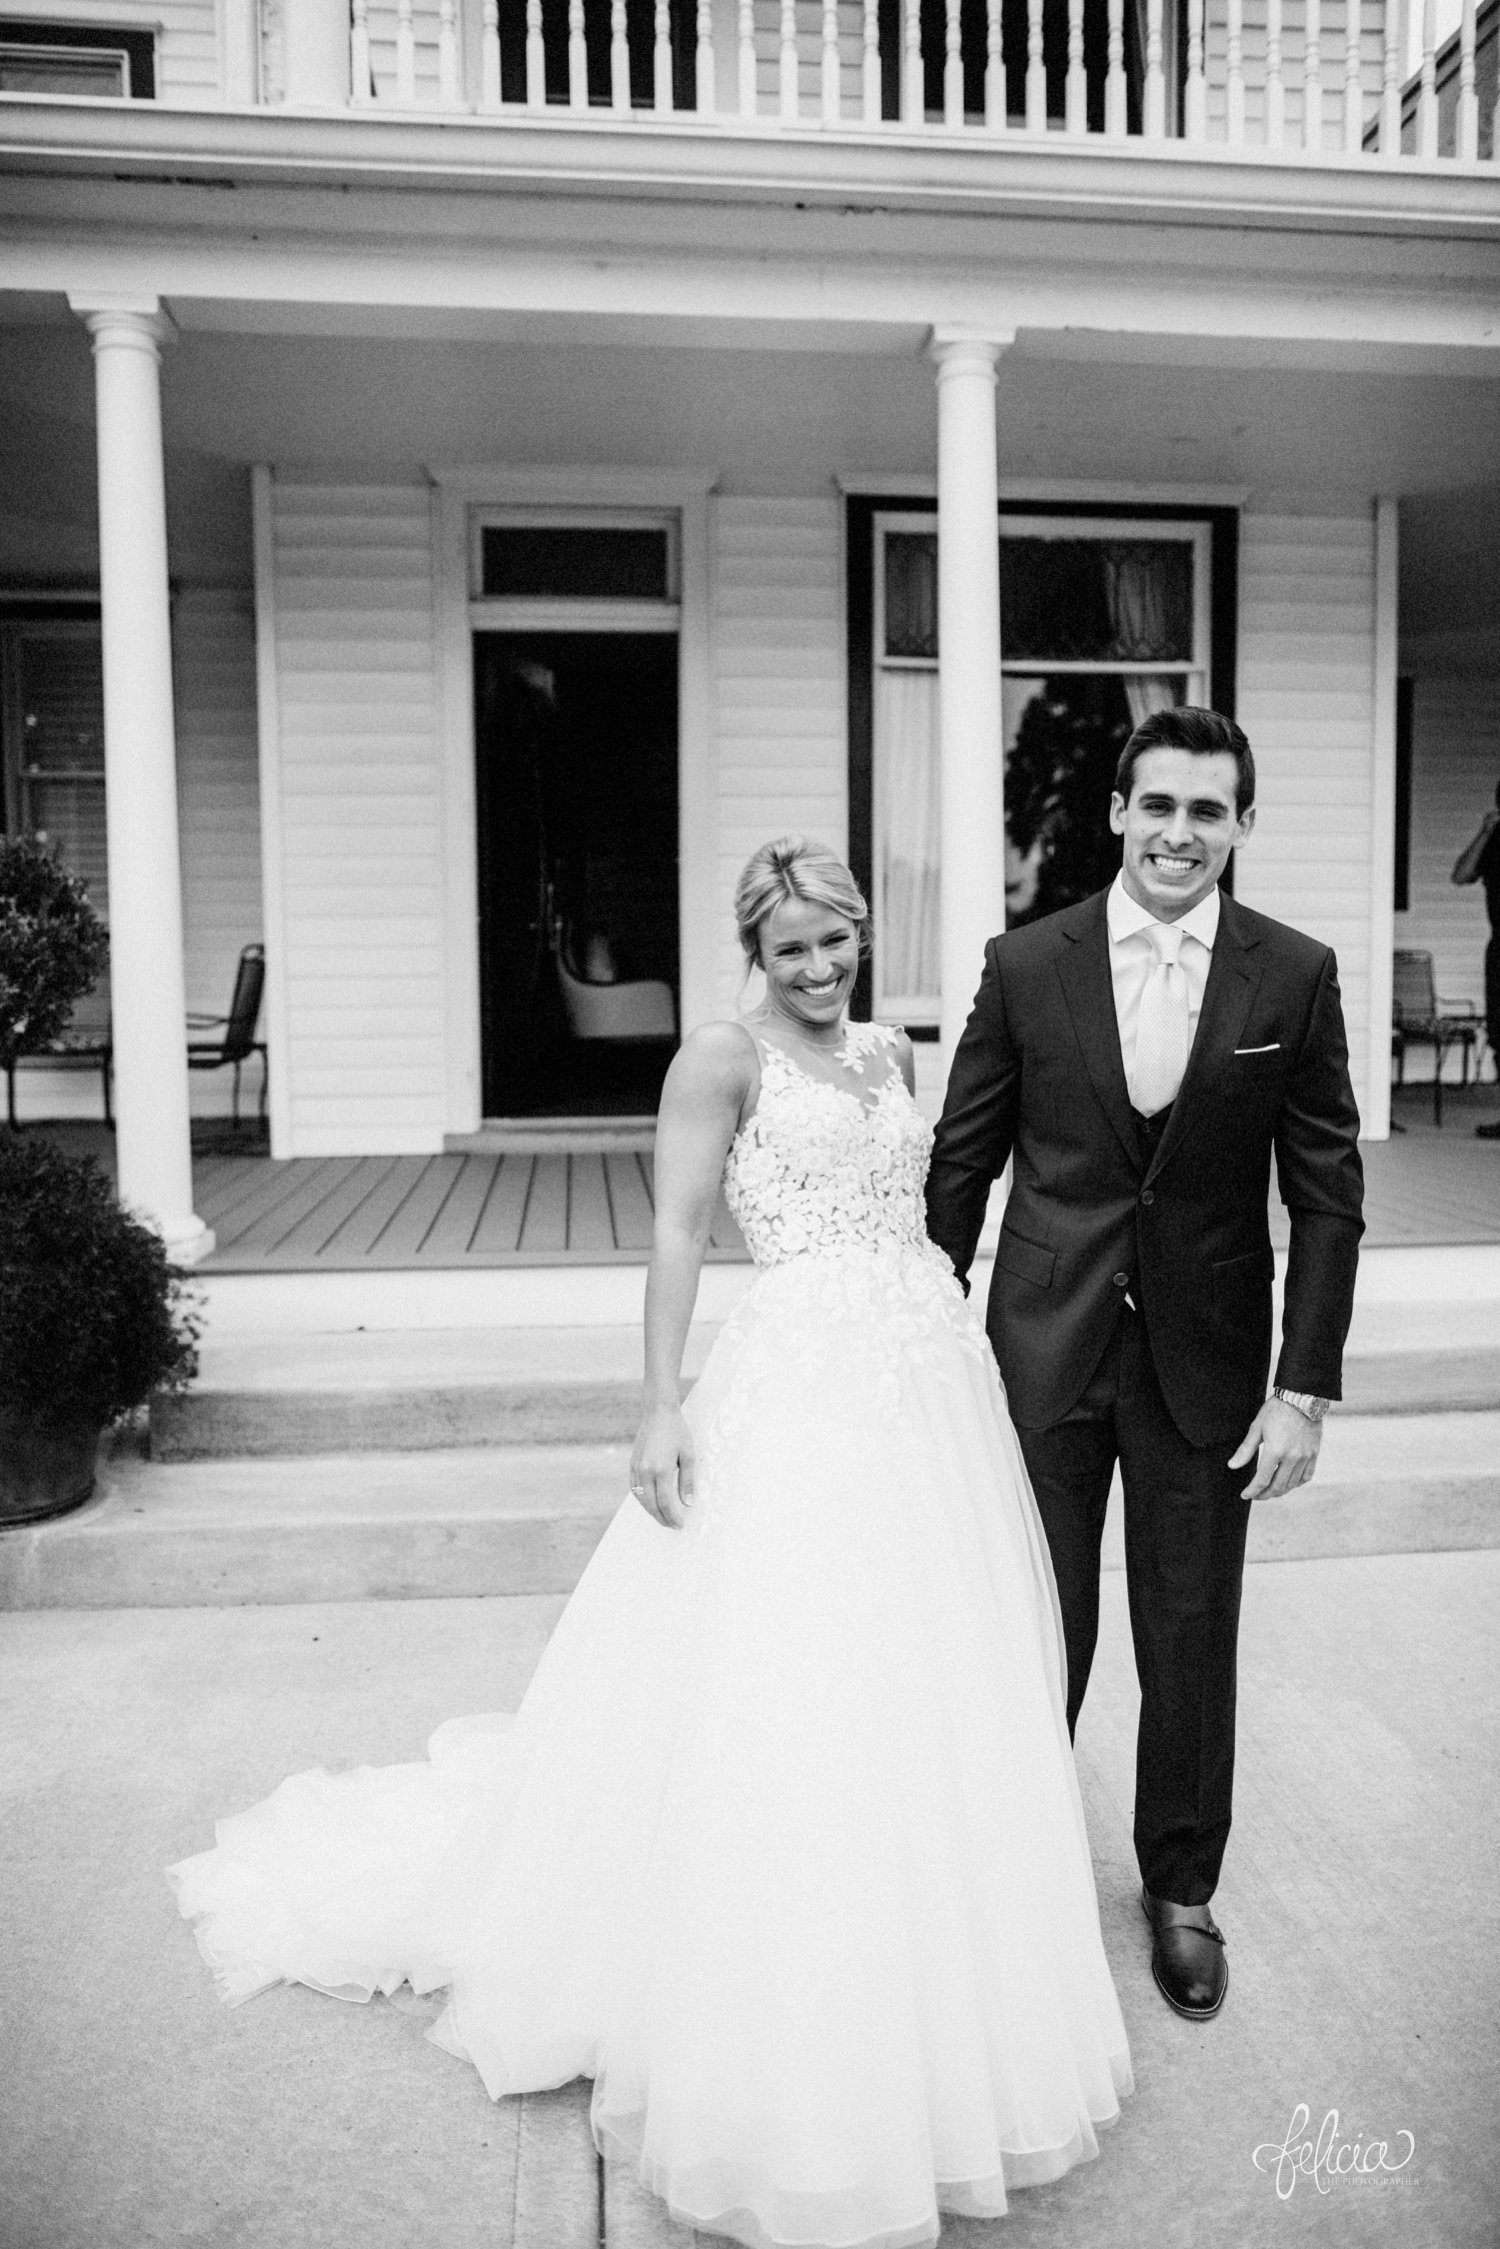 images by feliciathephotographer.com | destination wedding photographer | kansas city | eighteen ninety | classic | first look | pre ceremony | floral lace backed dress | bridal extraordinaire | pronovias | J. H. & sons clothier | navy suit | true love | black and white | 